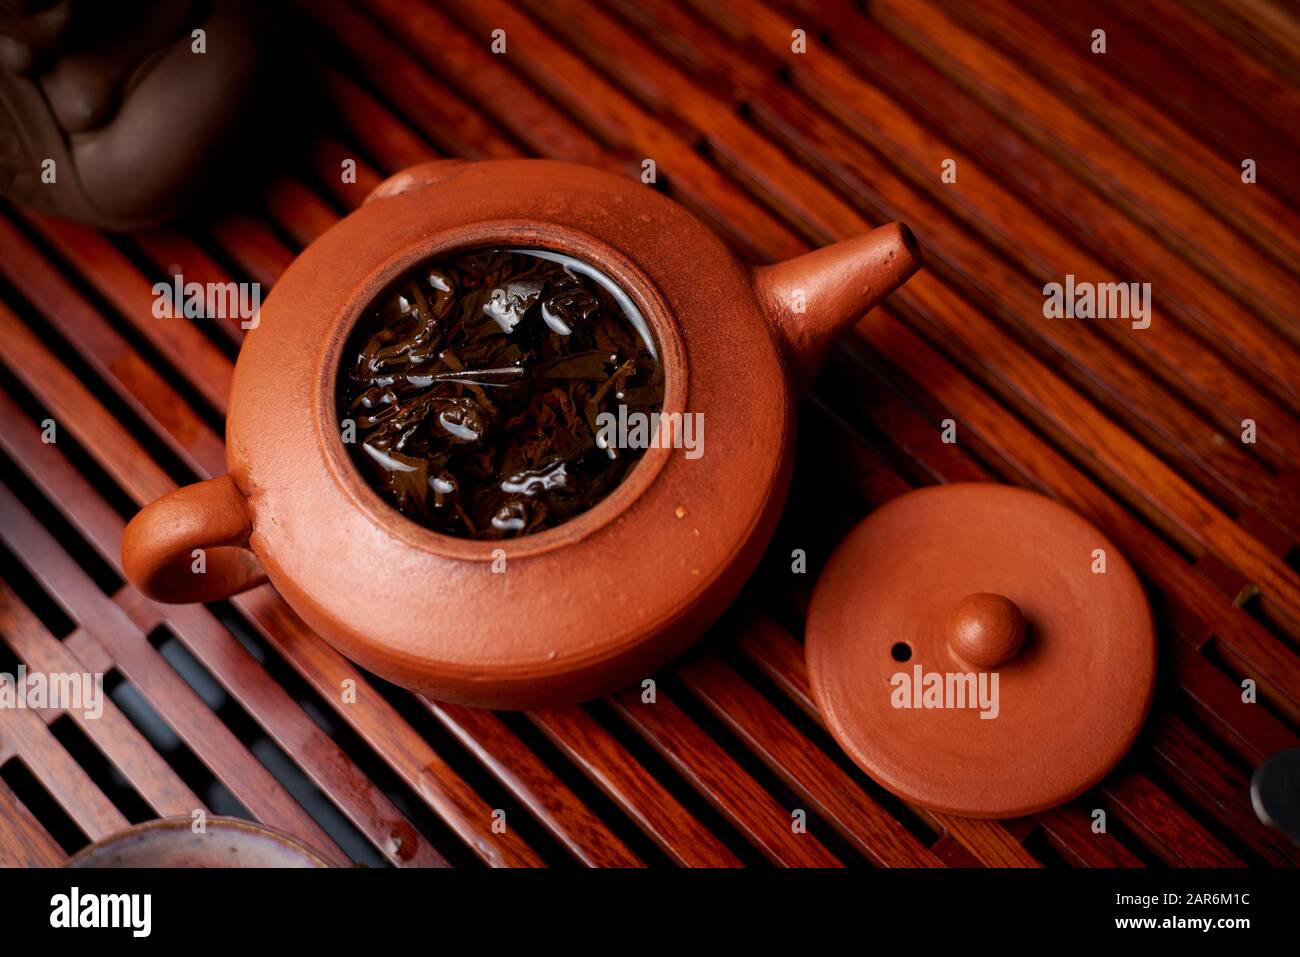 Brewed tea leaves in a teapot. Stock Photo